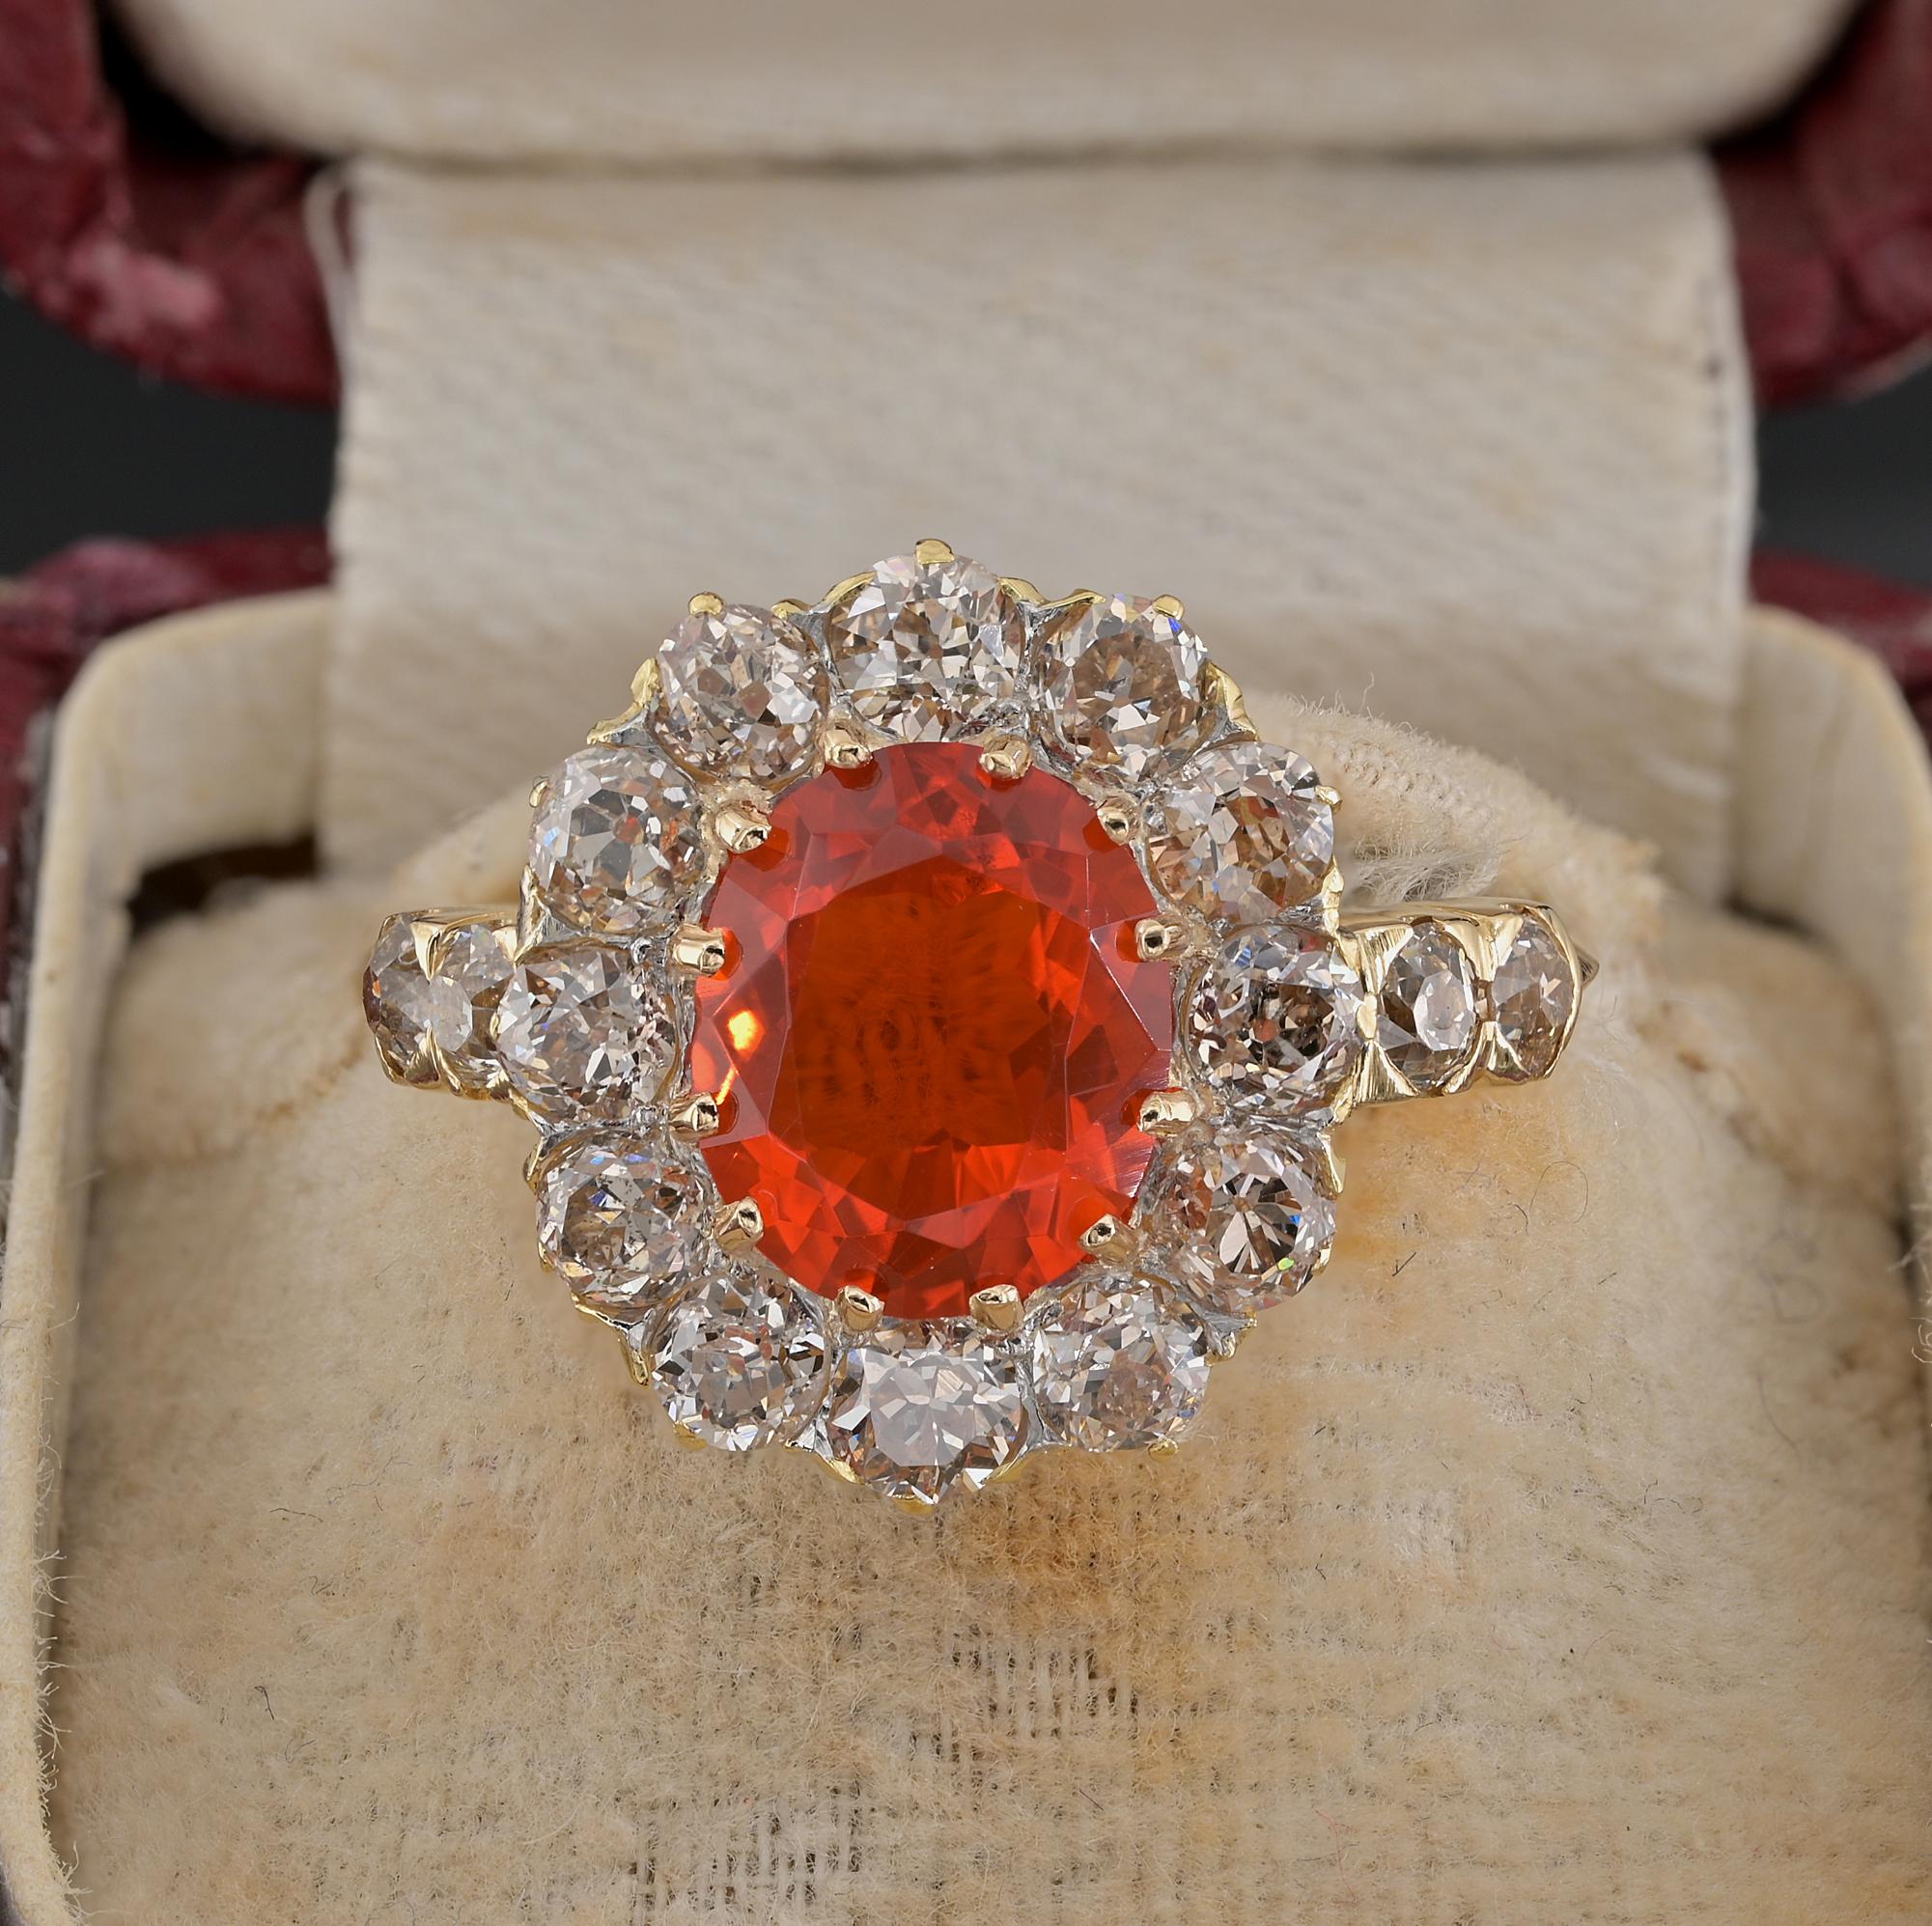 Treasure to get hold of!
Magnificent authentic Victorian Fire Opal & Diamond ring 1870 Ca!
Crafted during the time of solid 18 Kt gold, marked, glorious fine workmanship from the period
Classic cluster style made by the beauty of the gemstones set